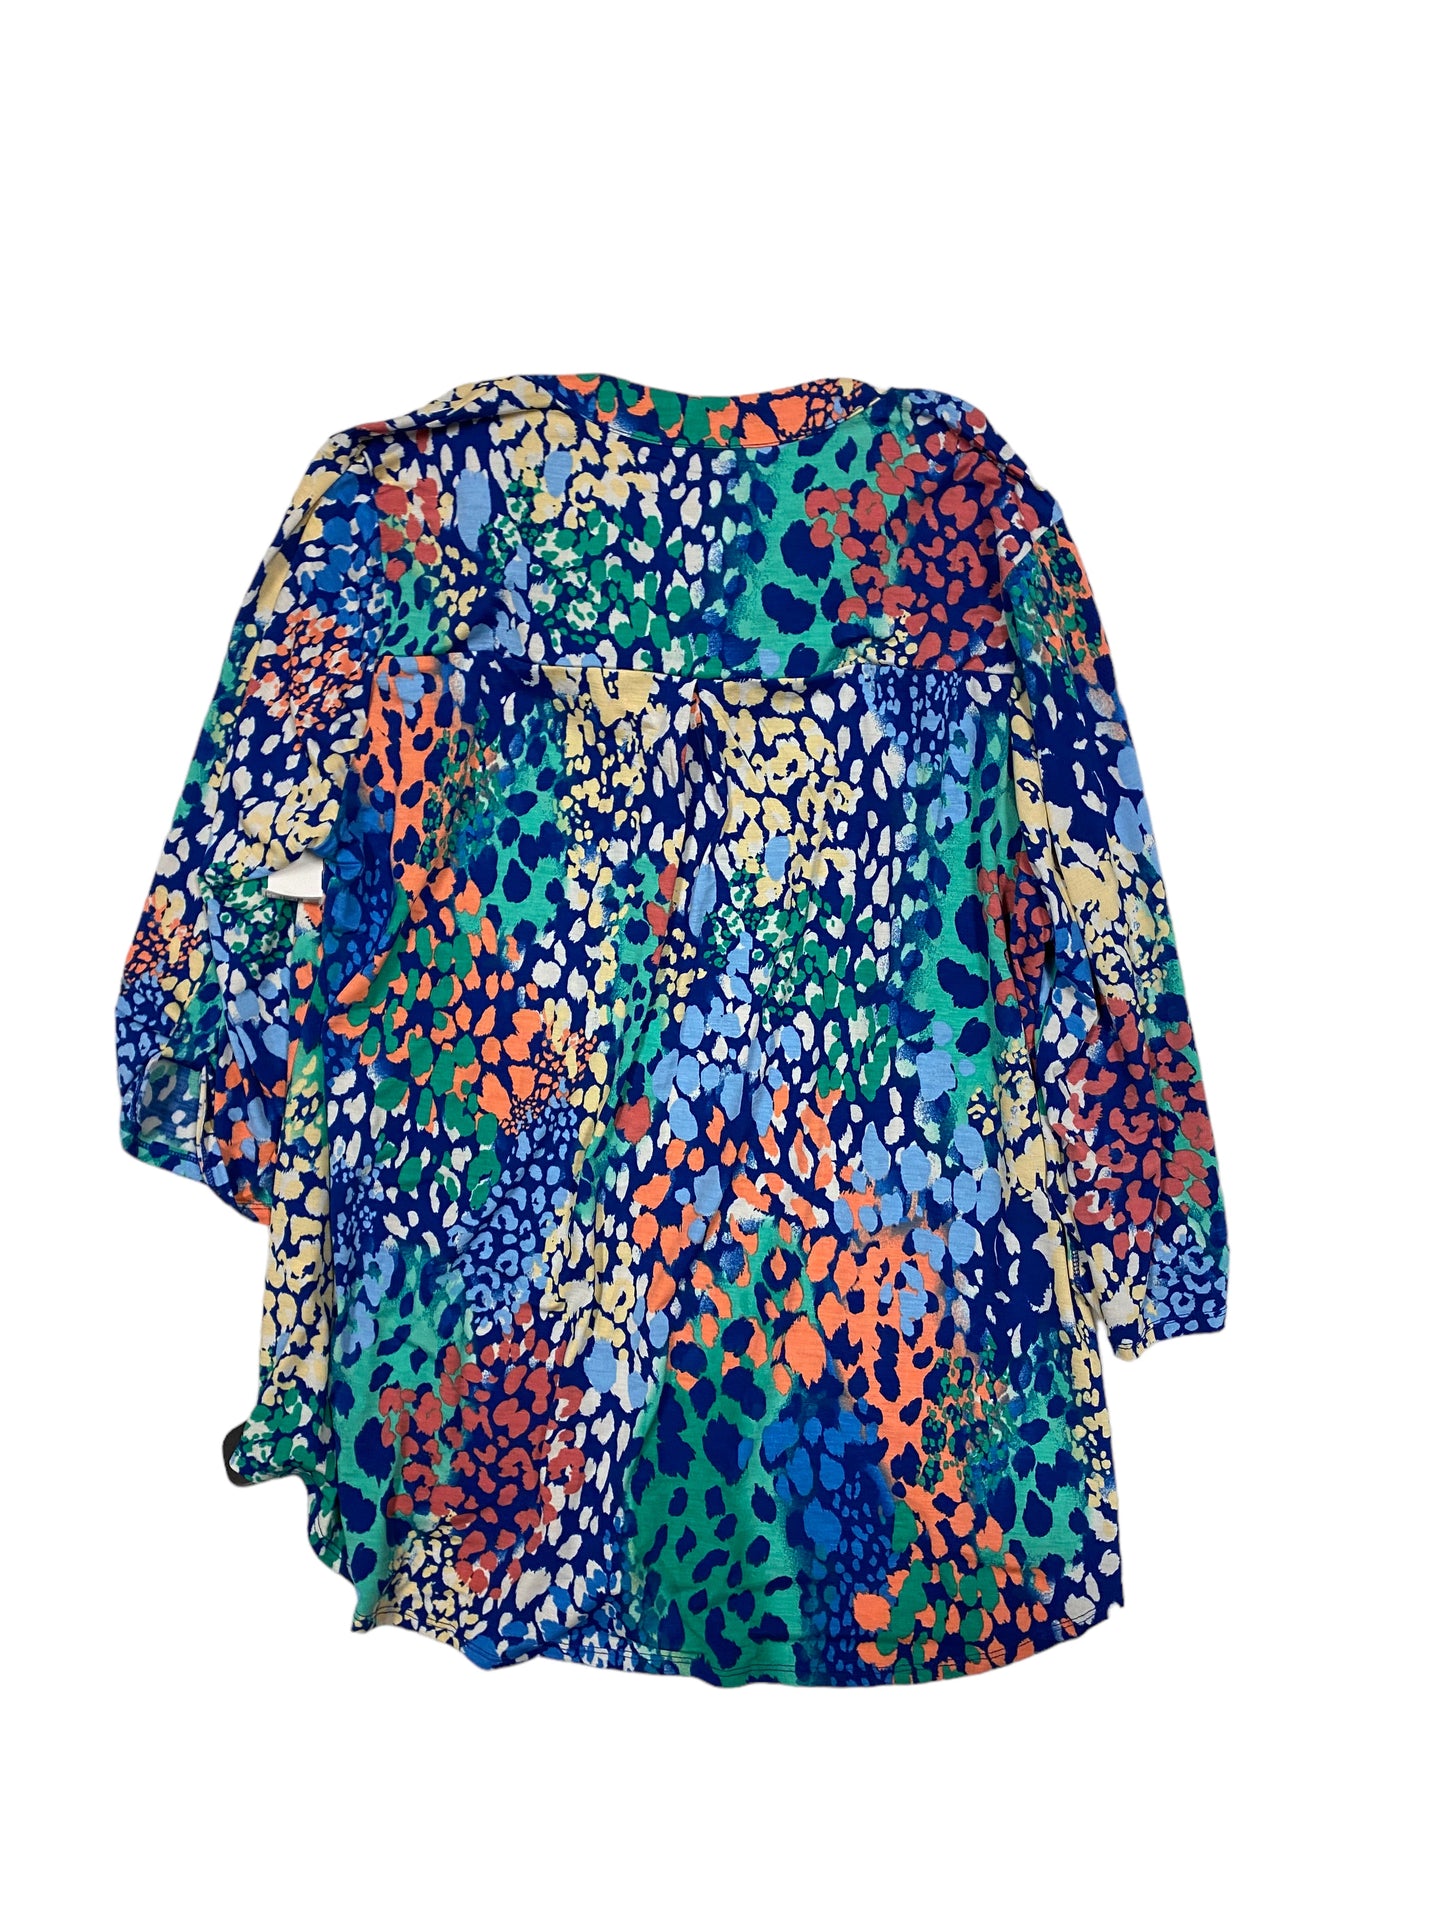 Multi-colored Top 3/4 Sleeve Cmc, Size Xl